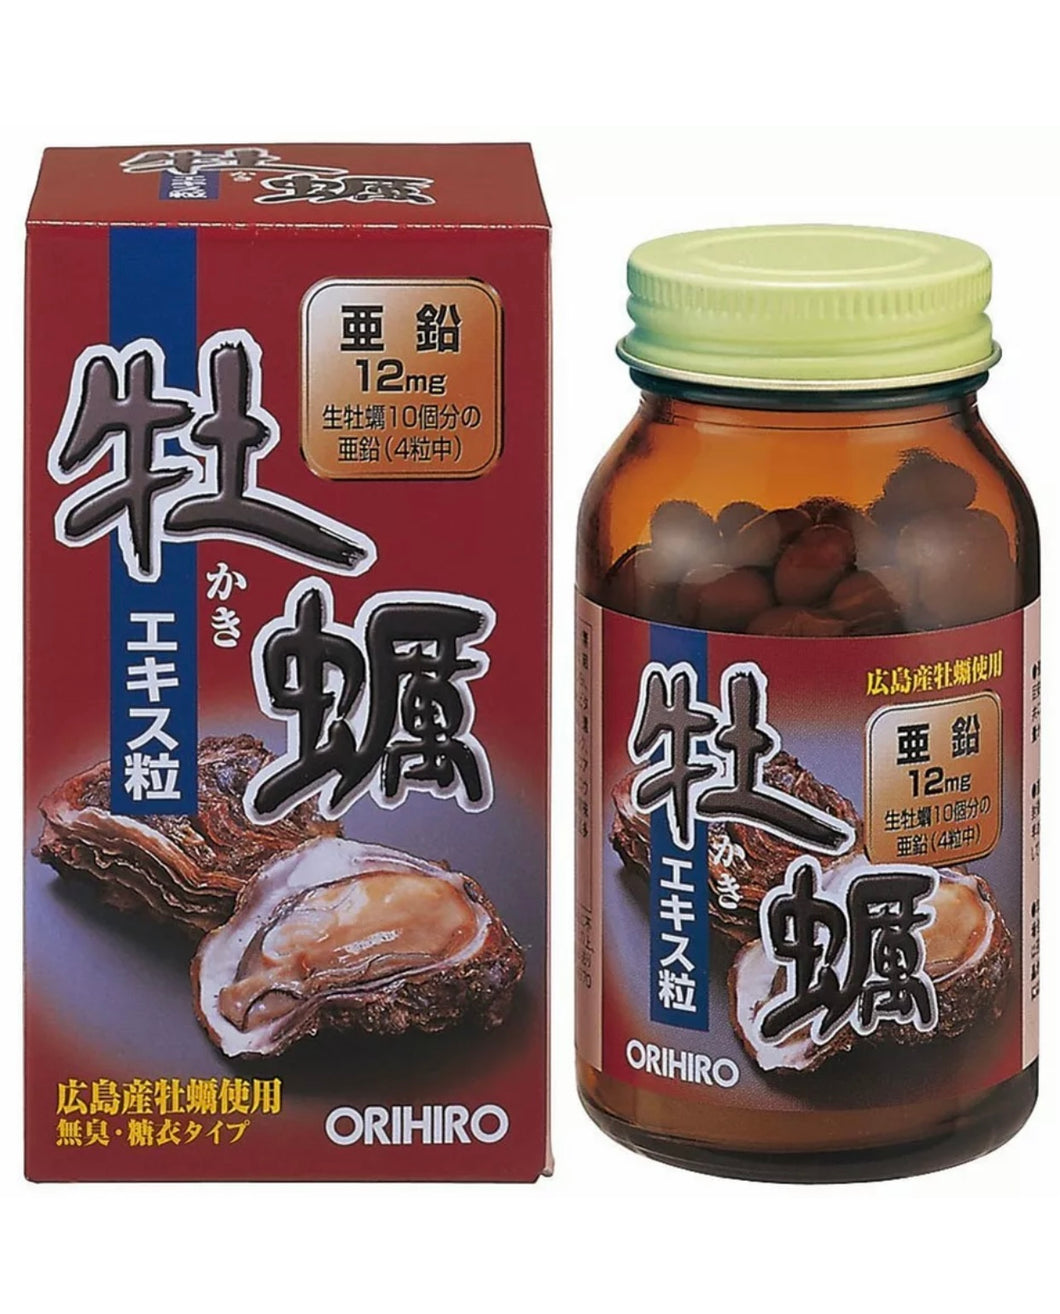 Orihiro Oyster Extract 120 tablets